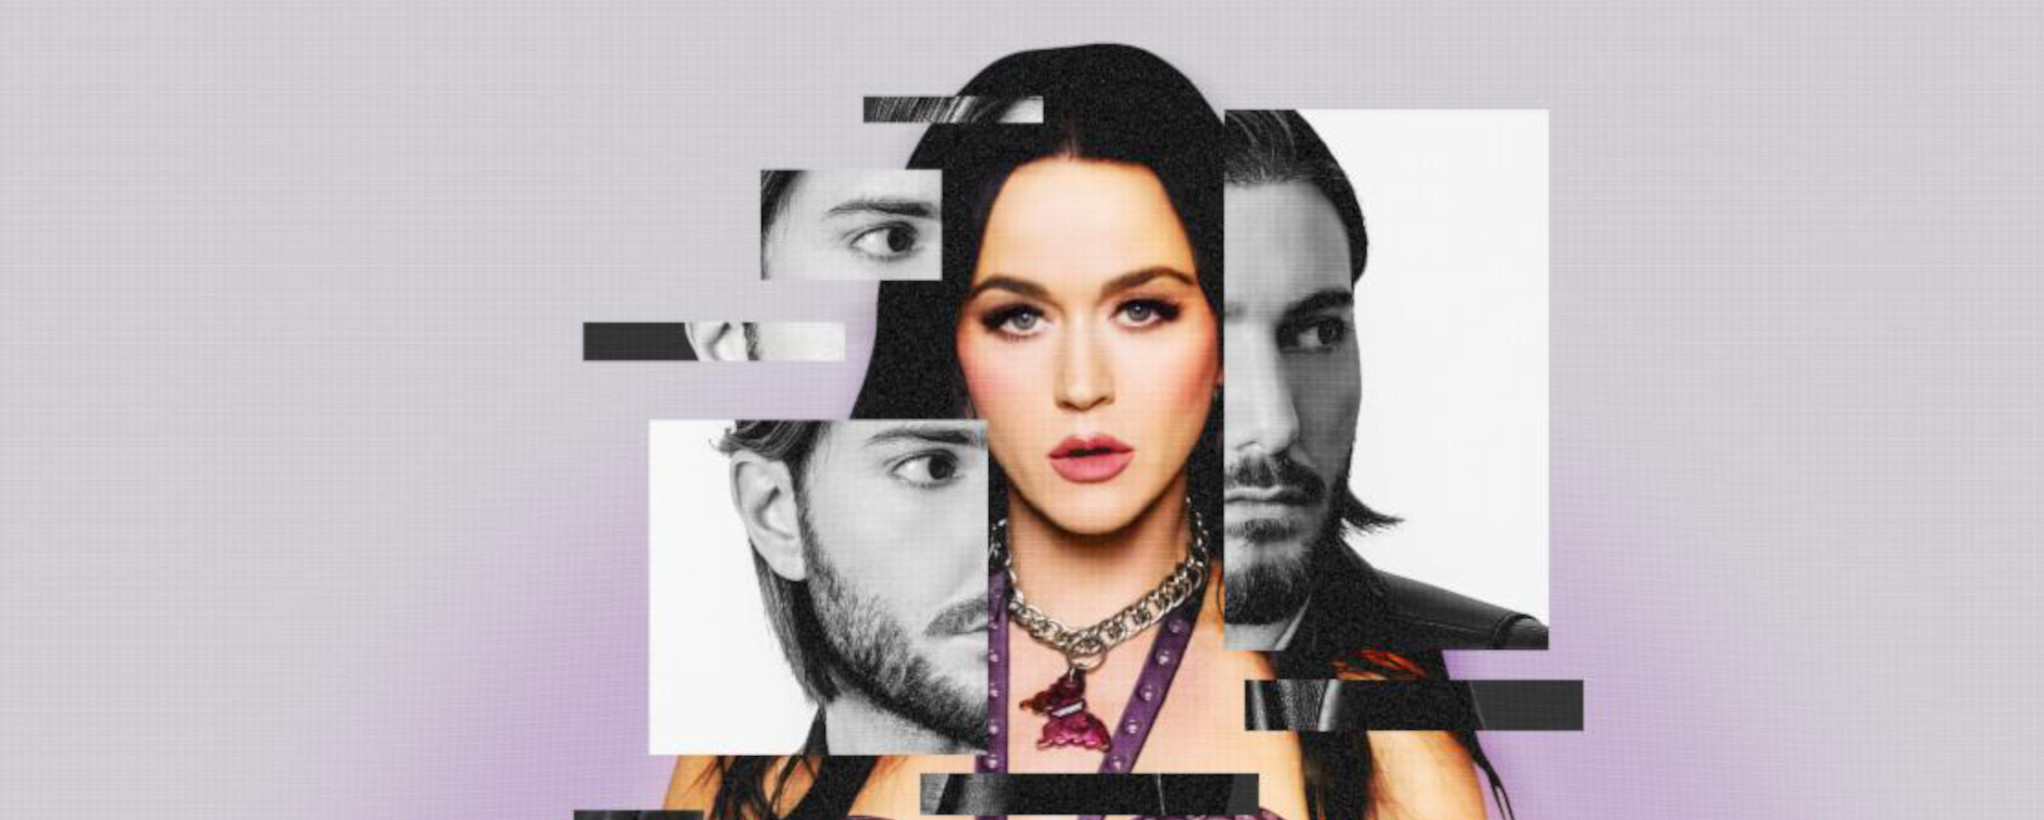 Katy Perry and Alesso Release New Song, “When I’m Gone”